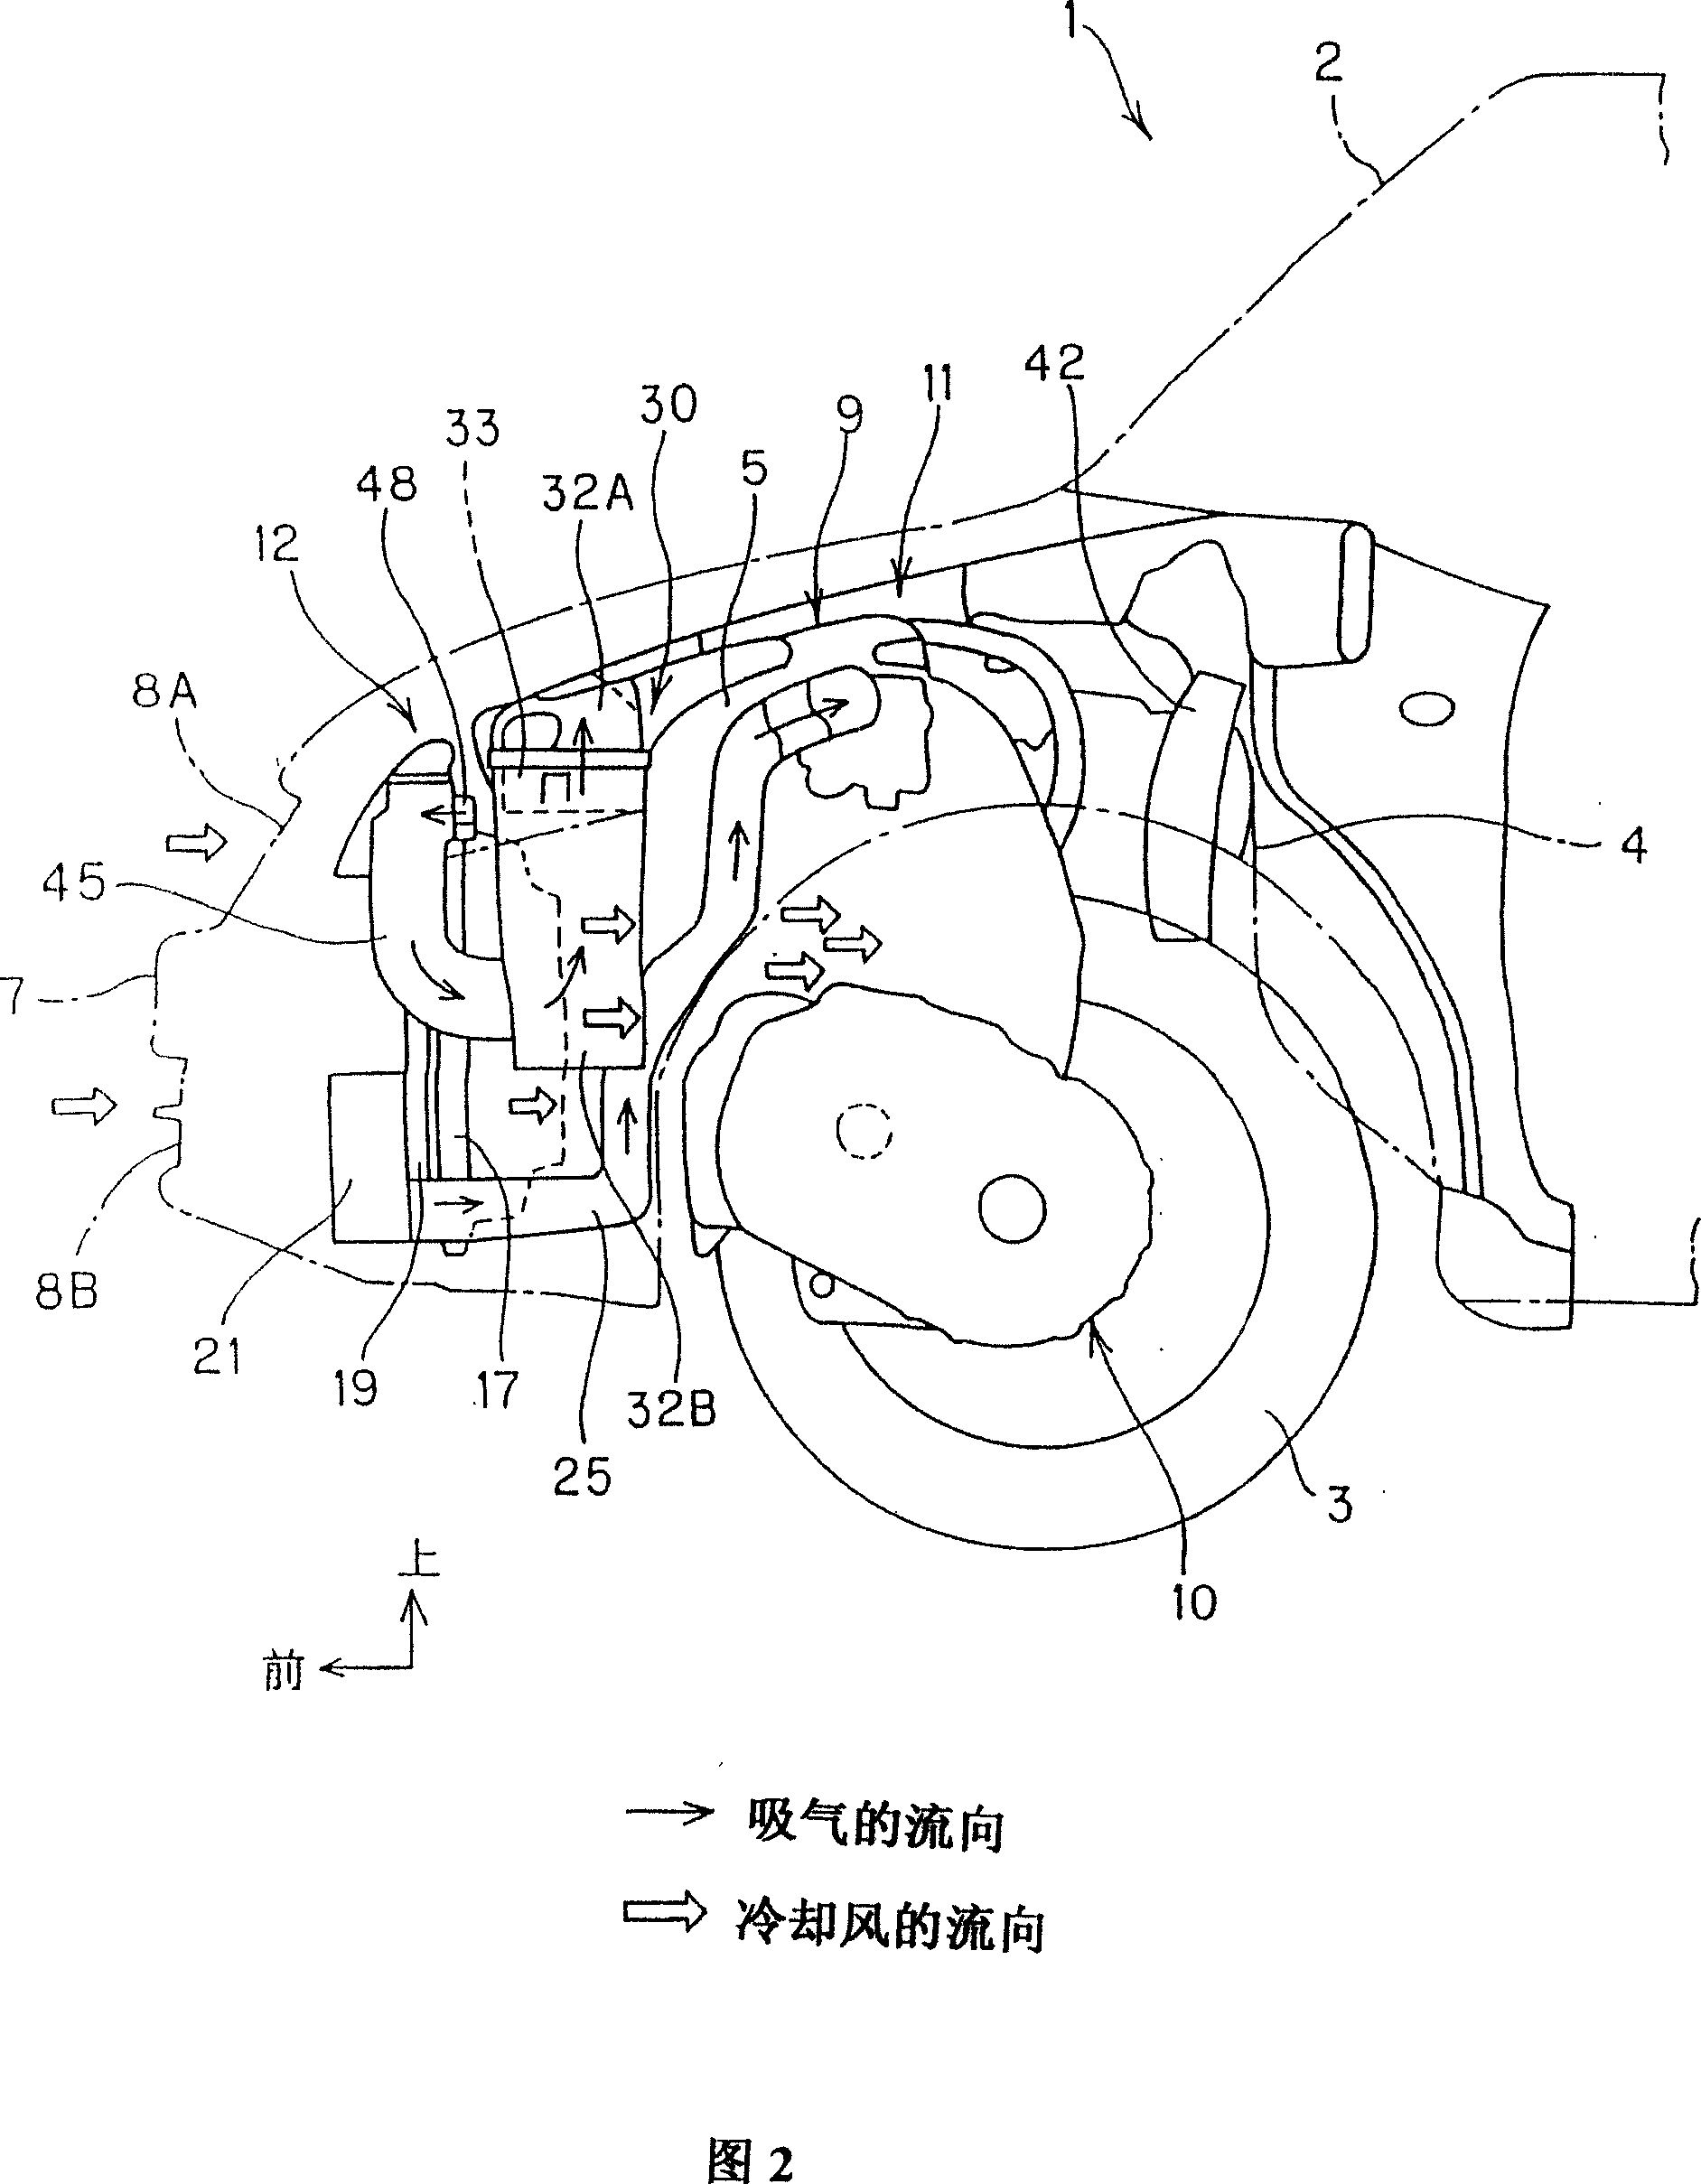 Air inlet unit of motor for vehicle